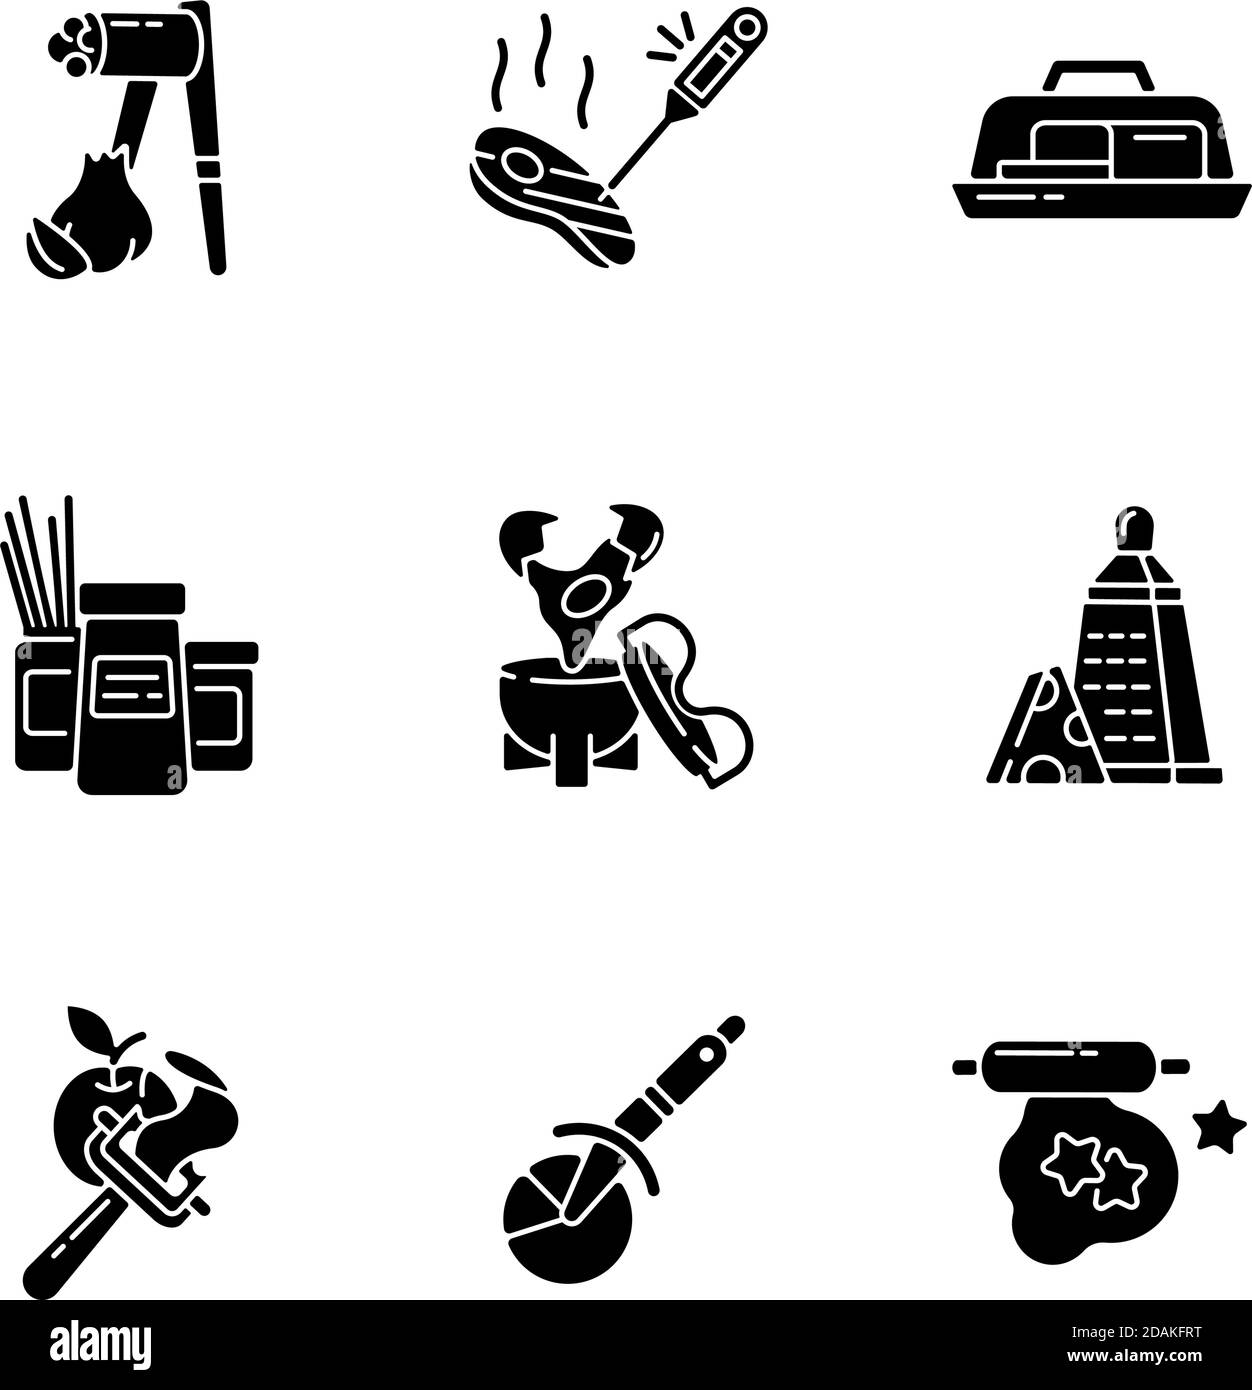 Food preparation utensils black glyph icons set on white space Stock Vector